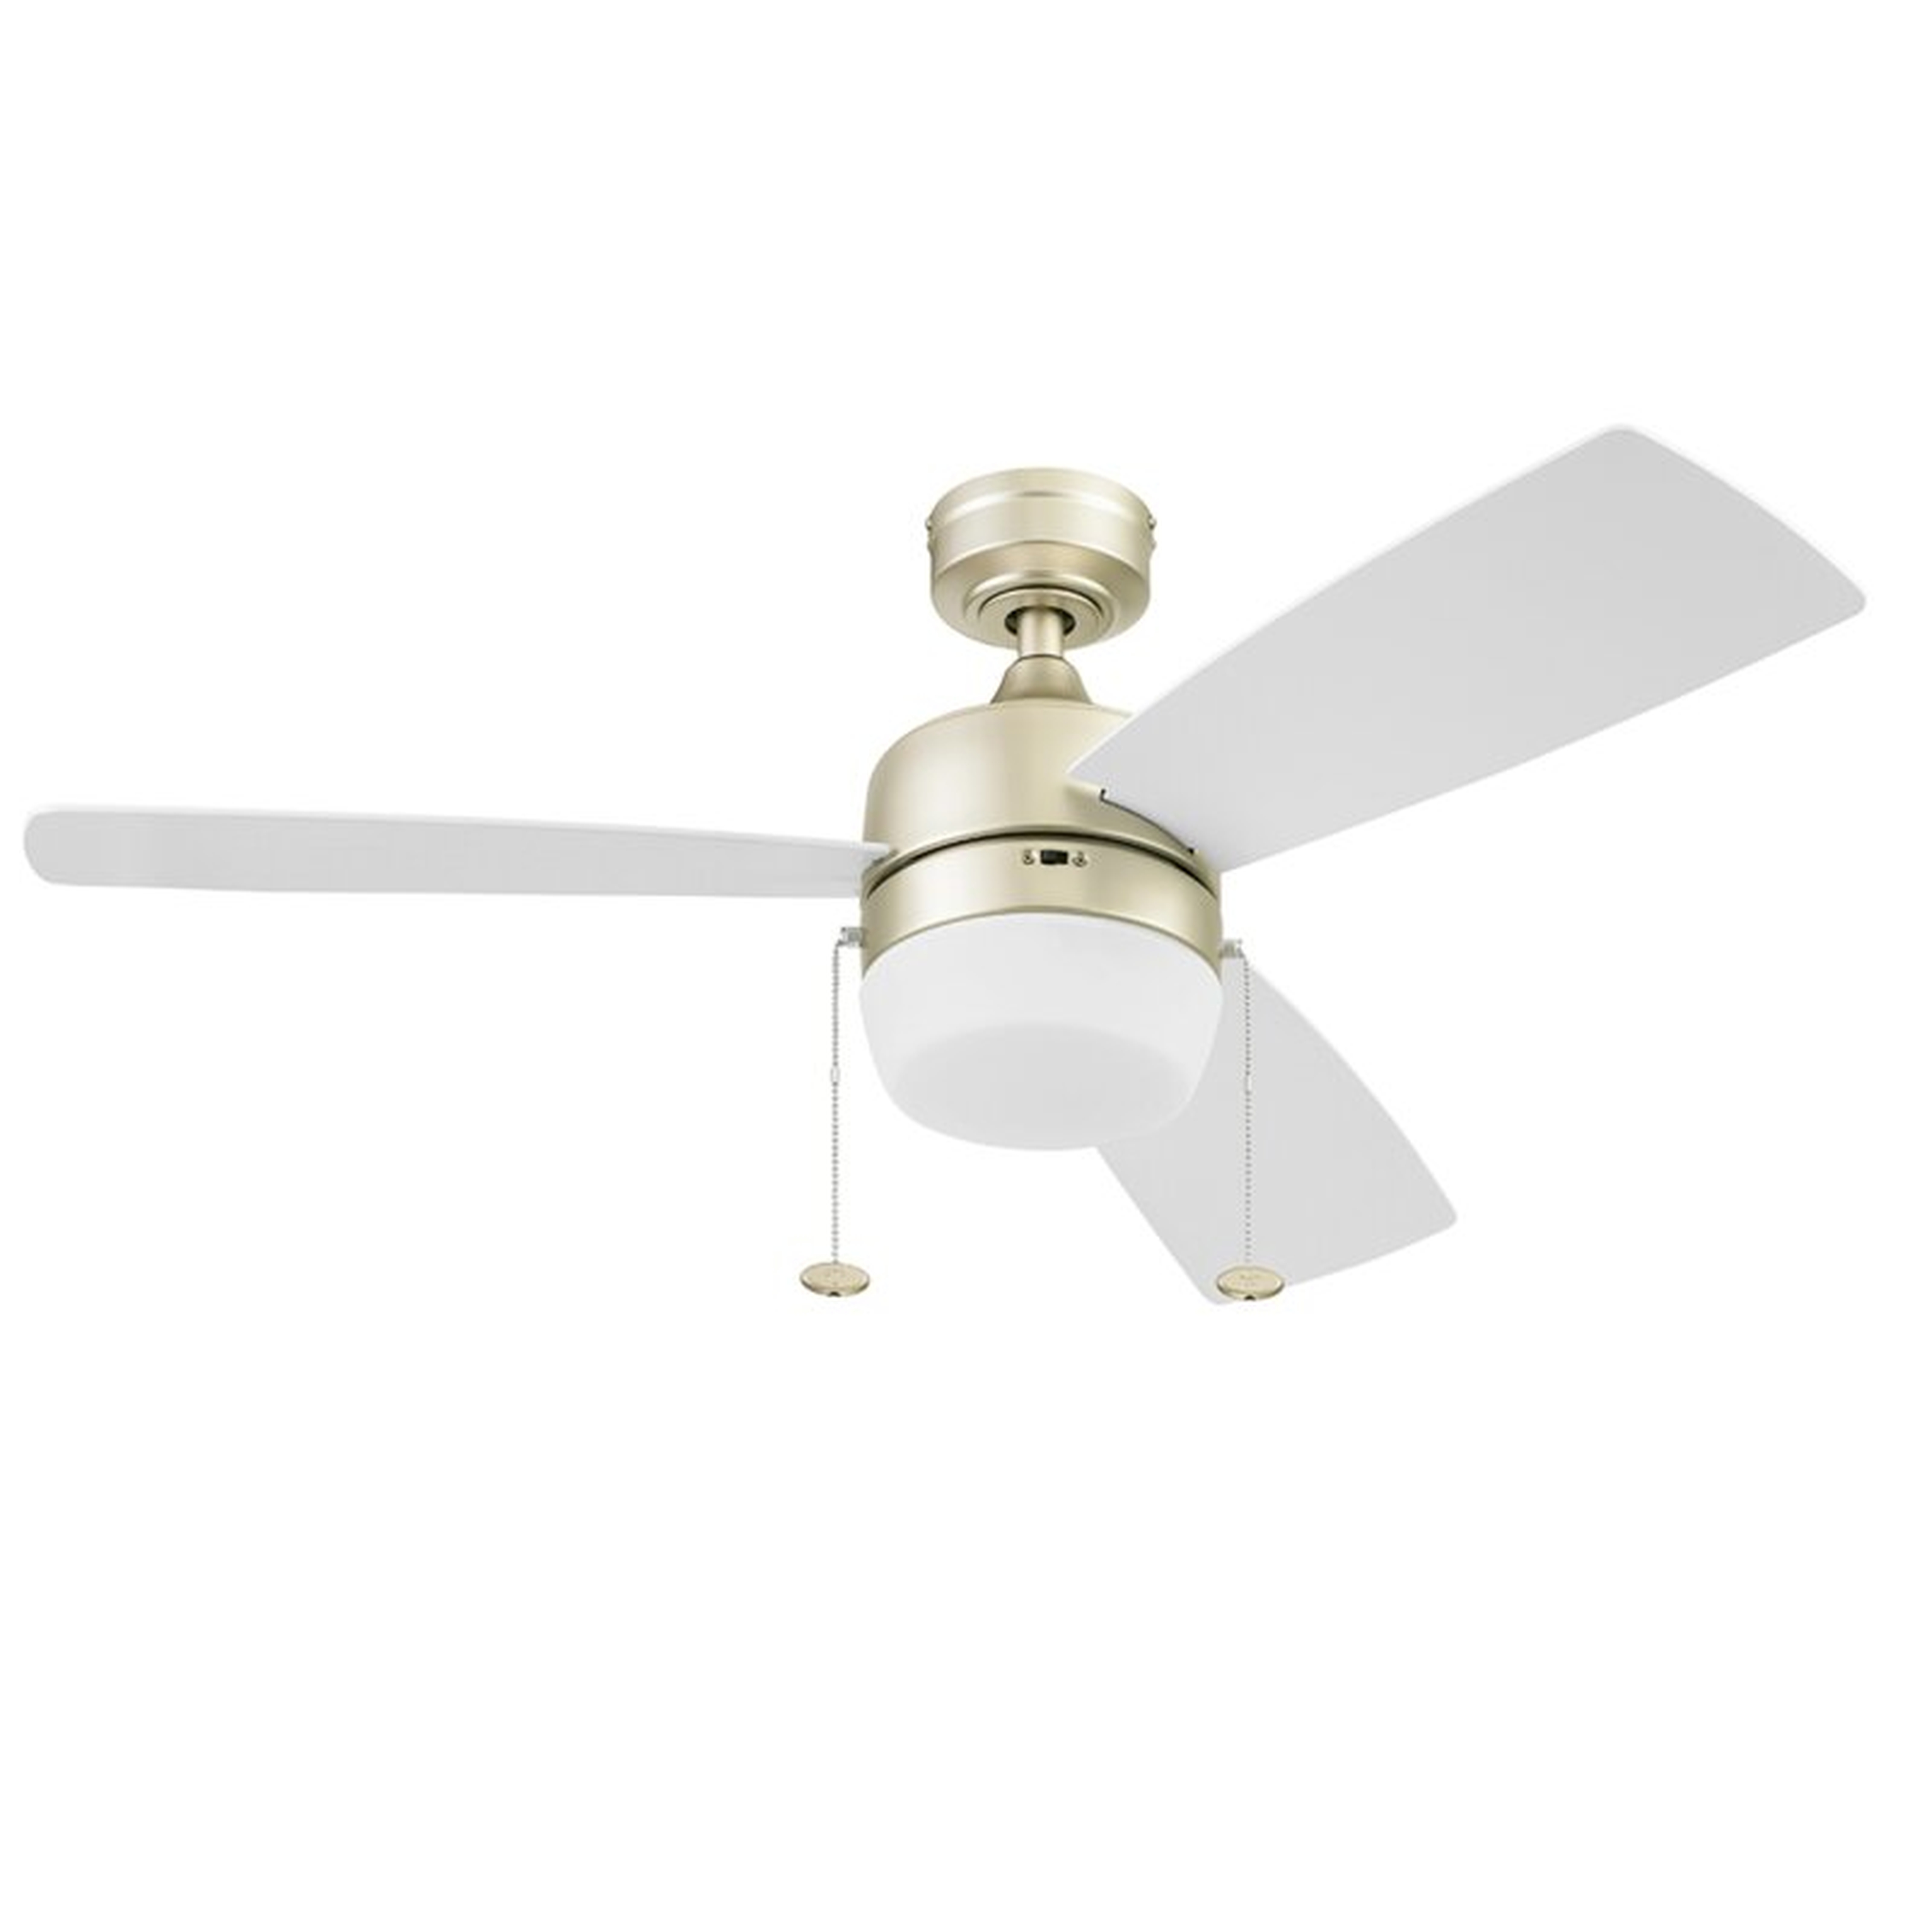 44'' Barcadero 3 - Blade LED Propeller Ceiling Fan with Pull Chain and Light Kit Included - Wayfair